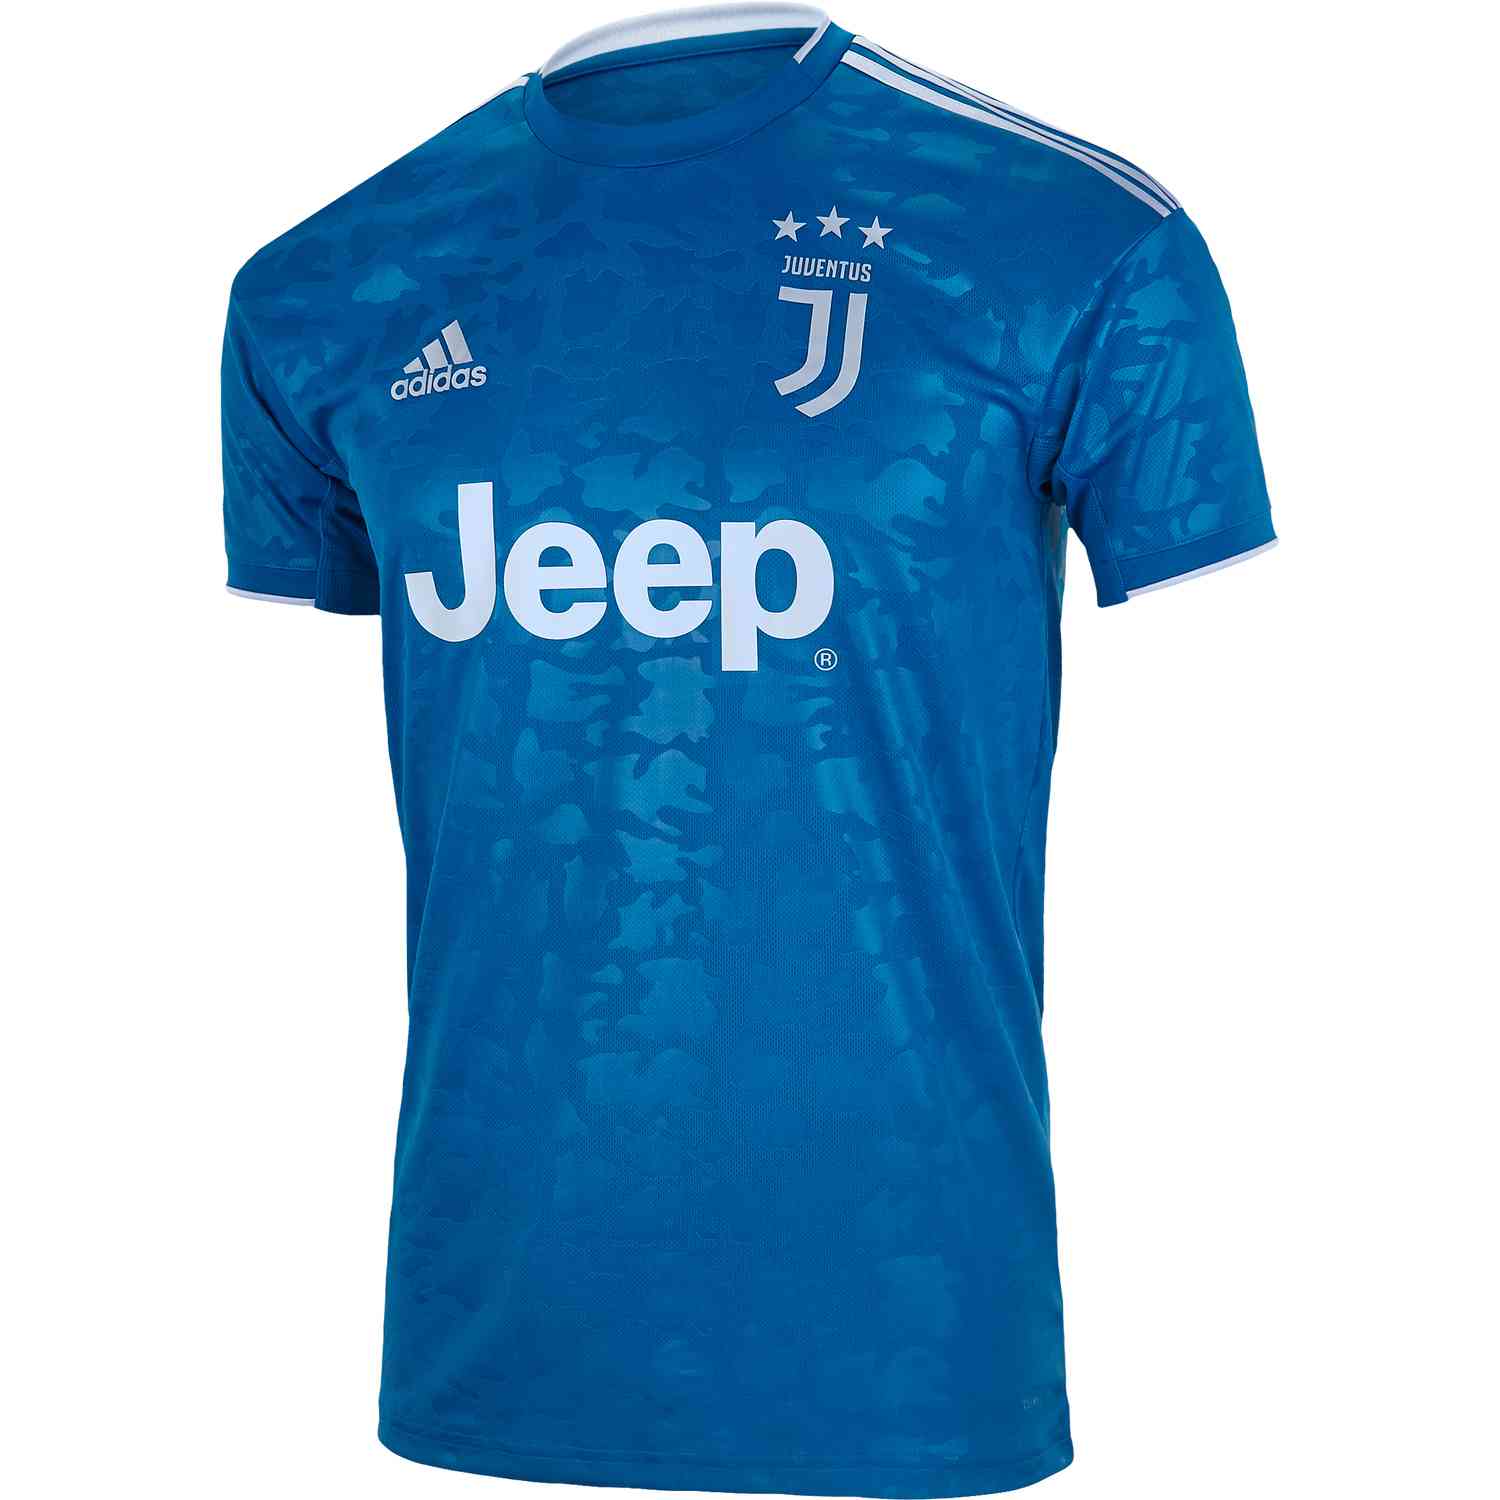 adidas jersey for kids